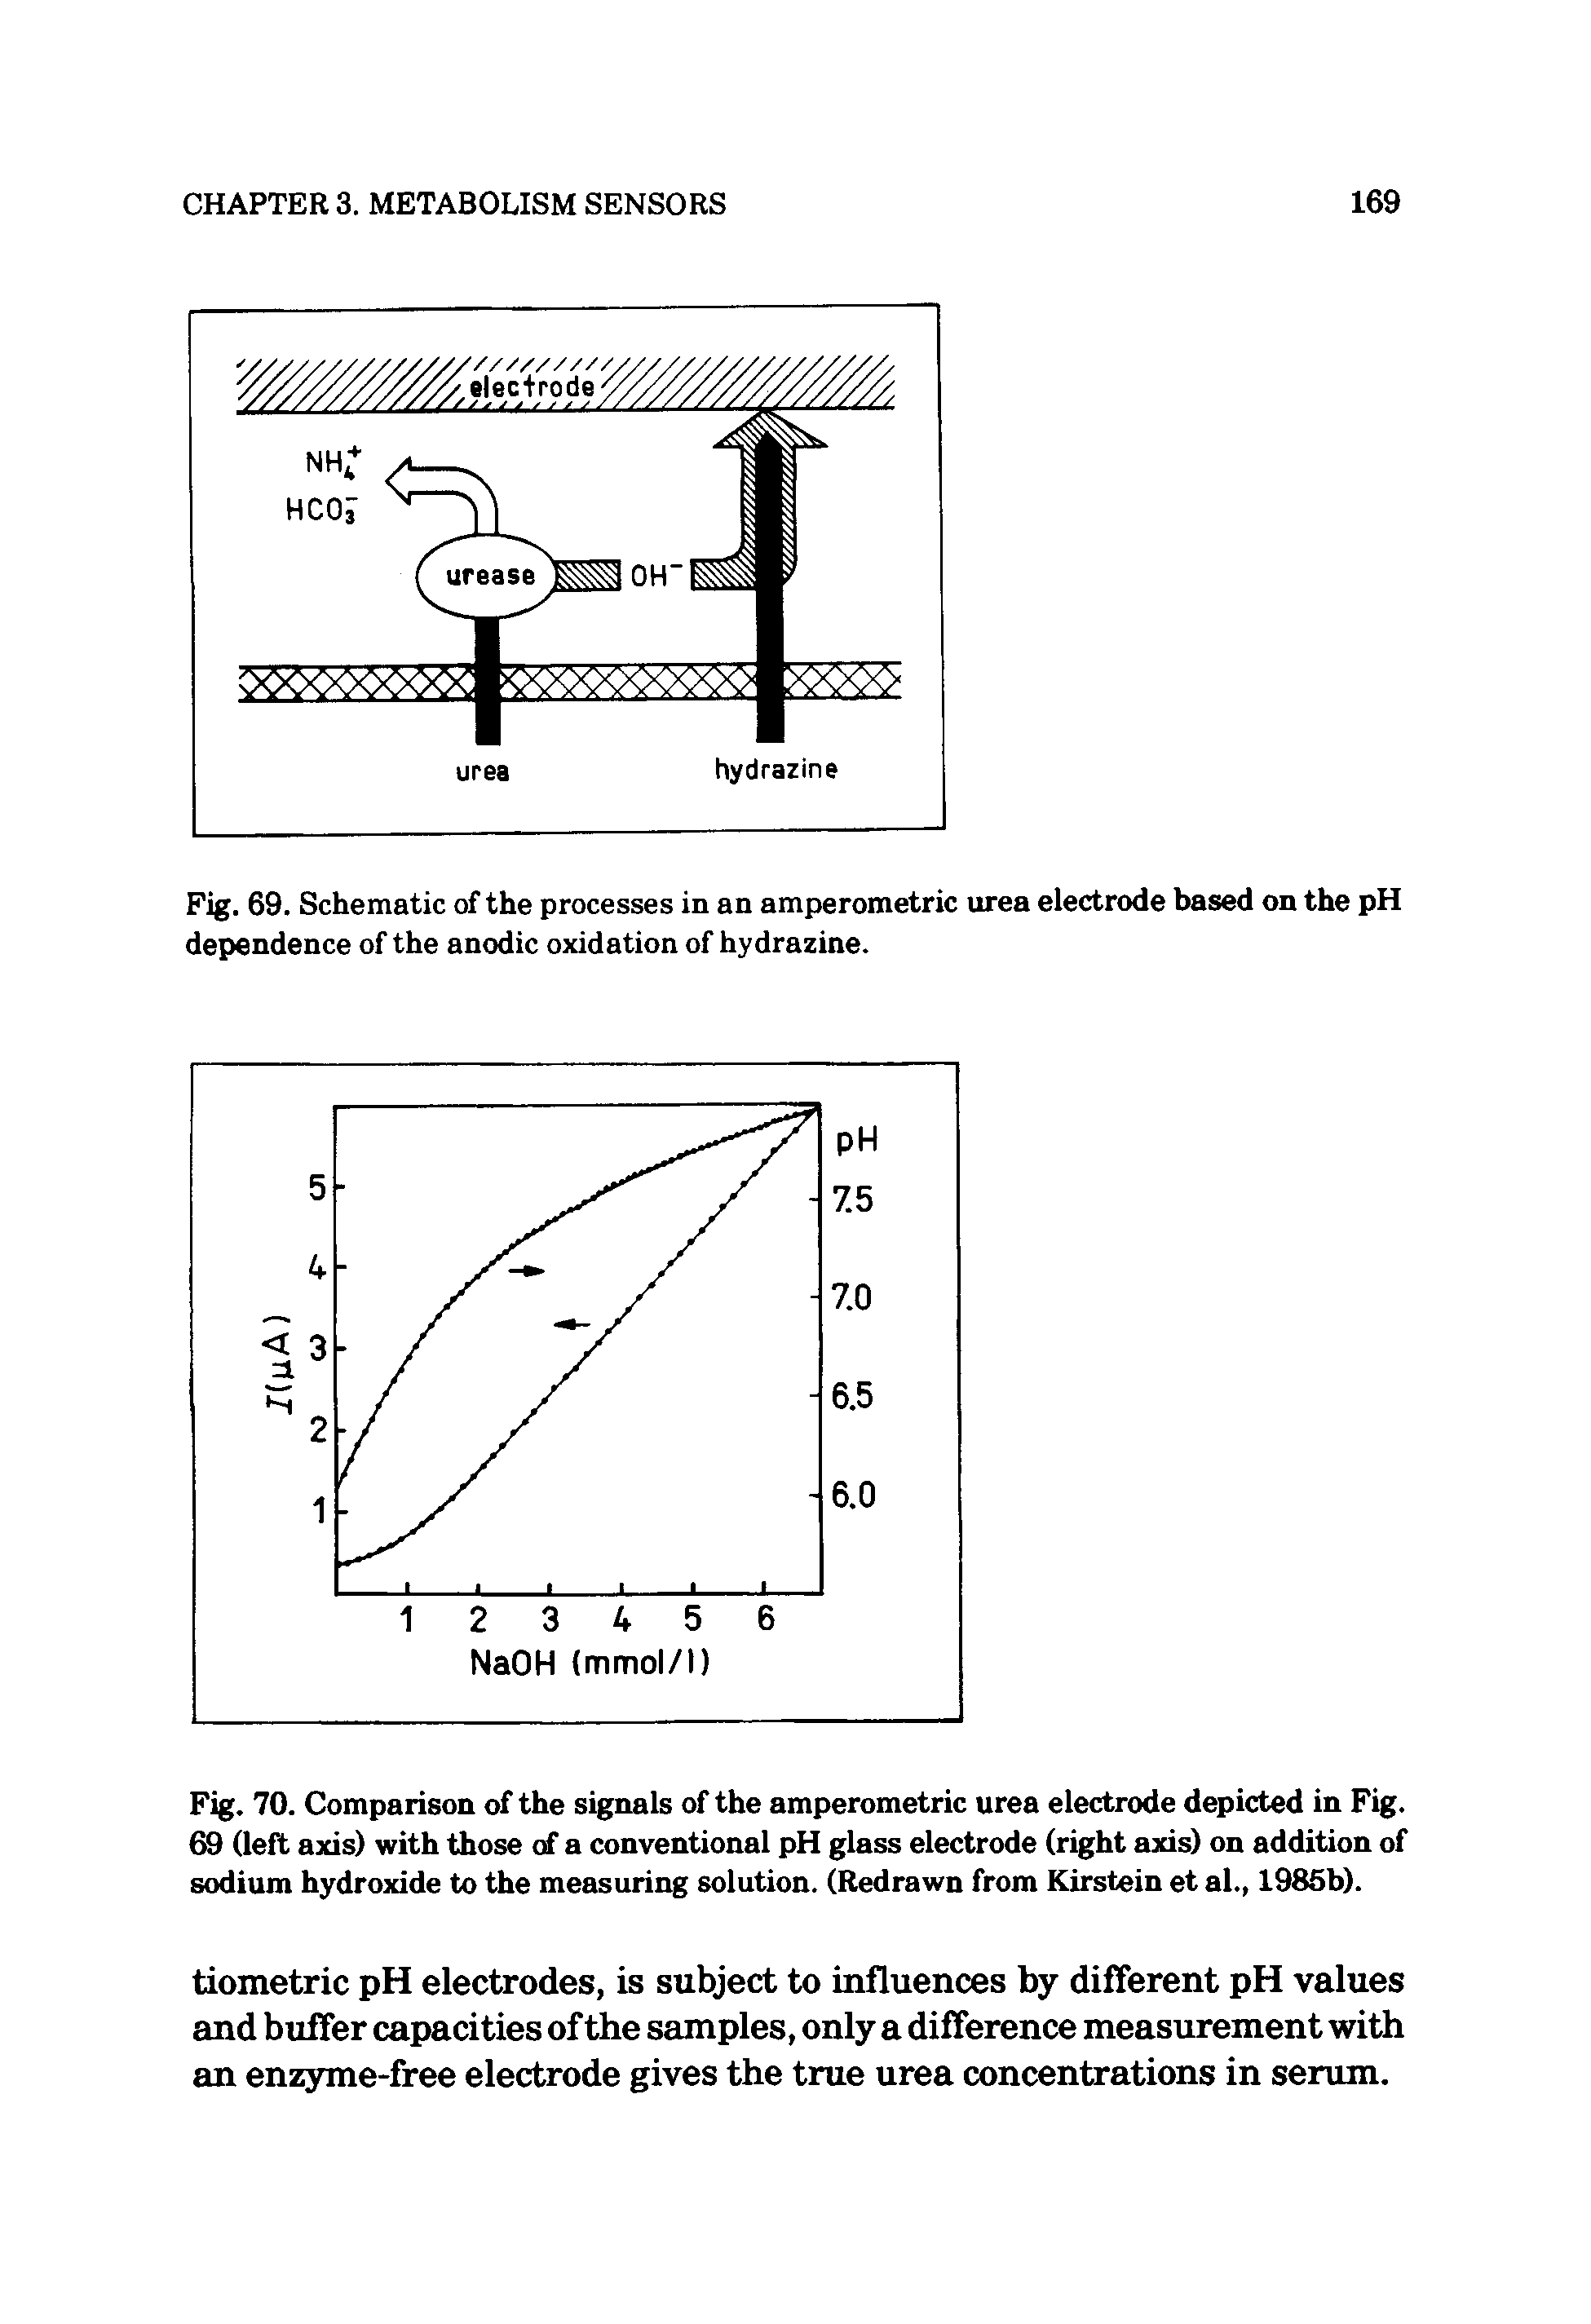 Fig. 70. Comparison of the signals of the amperometric urea electrode depicted in Fig. 69 (left axis) with those of a conventional pH glass electrode (right axis) on addition of sodium hydroxide to the measuring solution. (Redrawn from Kirstein et al., 1985b).